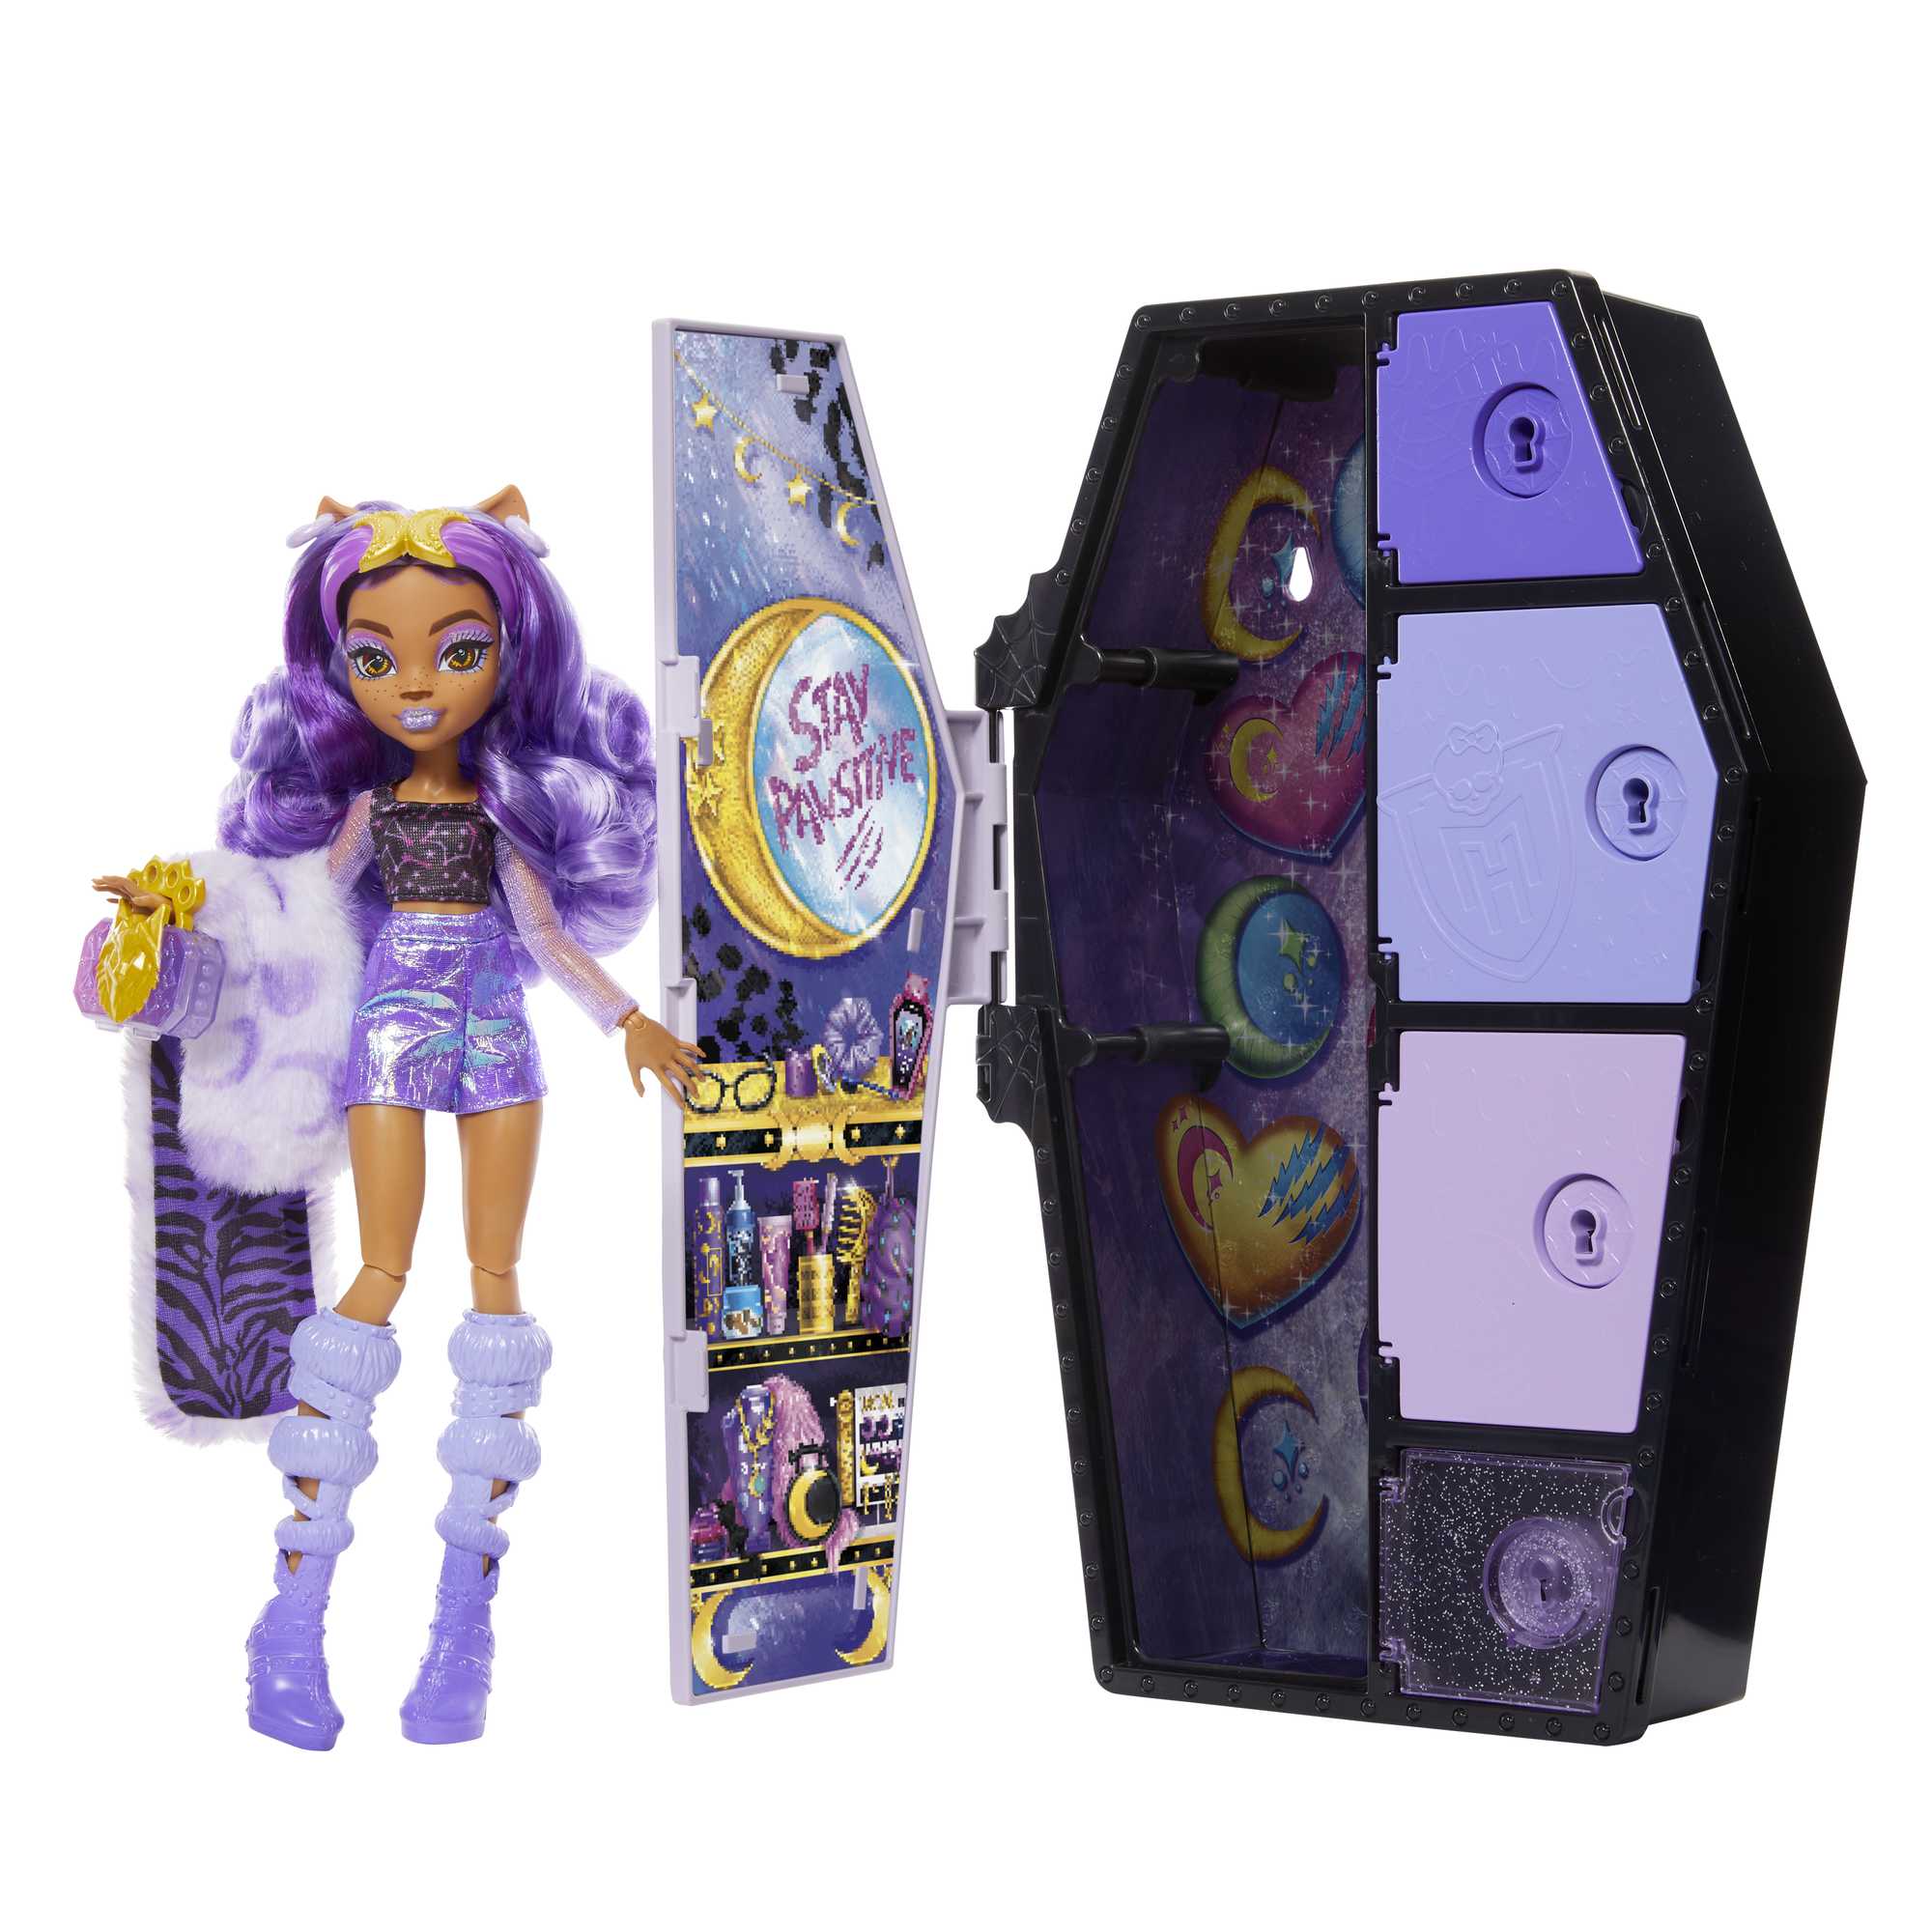 Polly Pocket Monster High Welcome to Monster High  